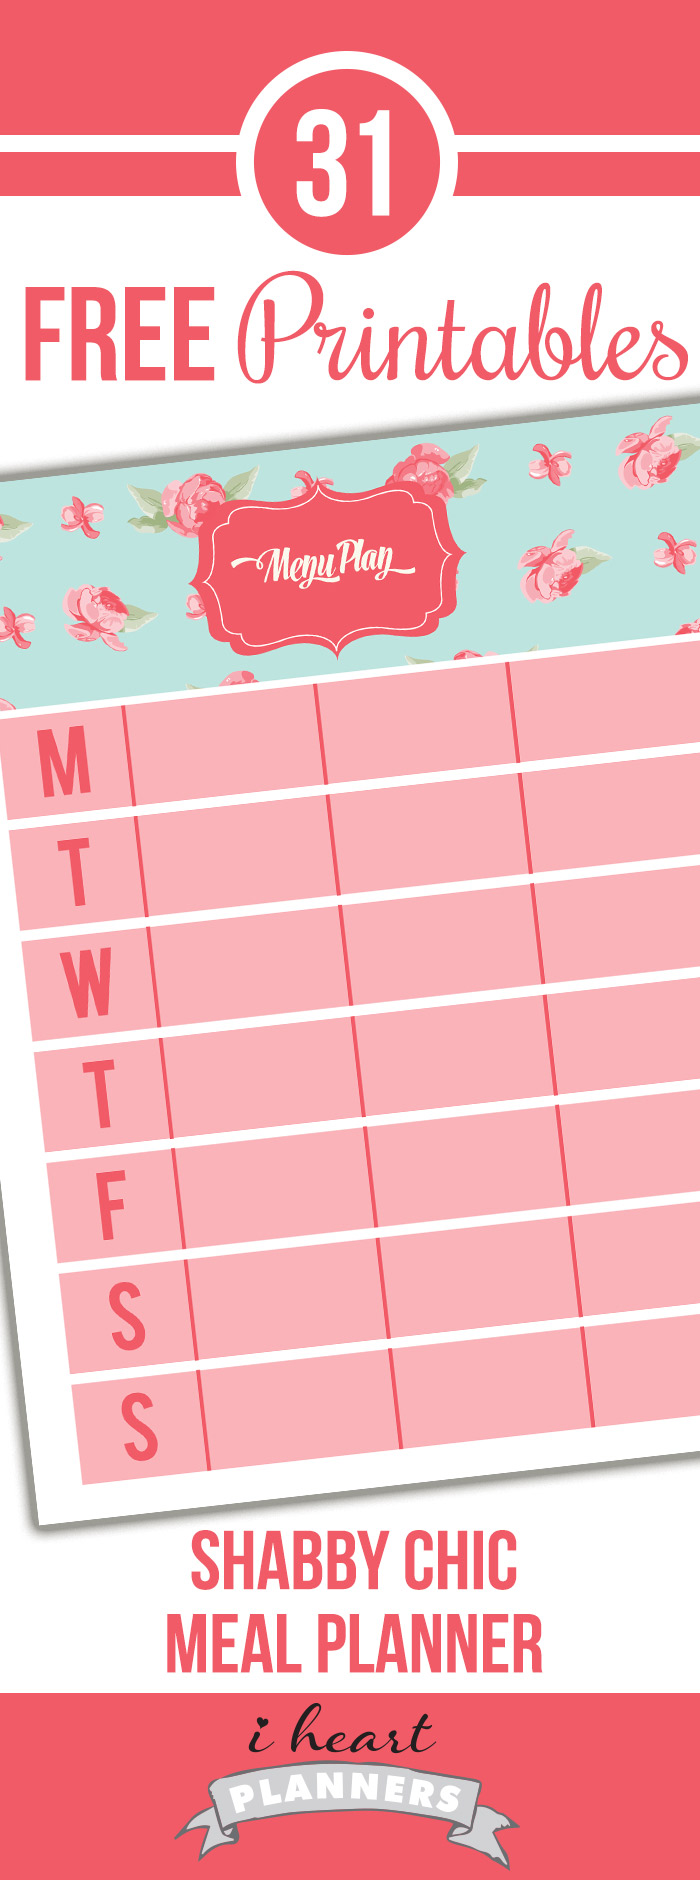 FREE Weekly Menu Planner in a shabby chic style